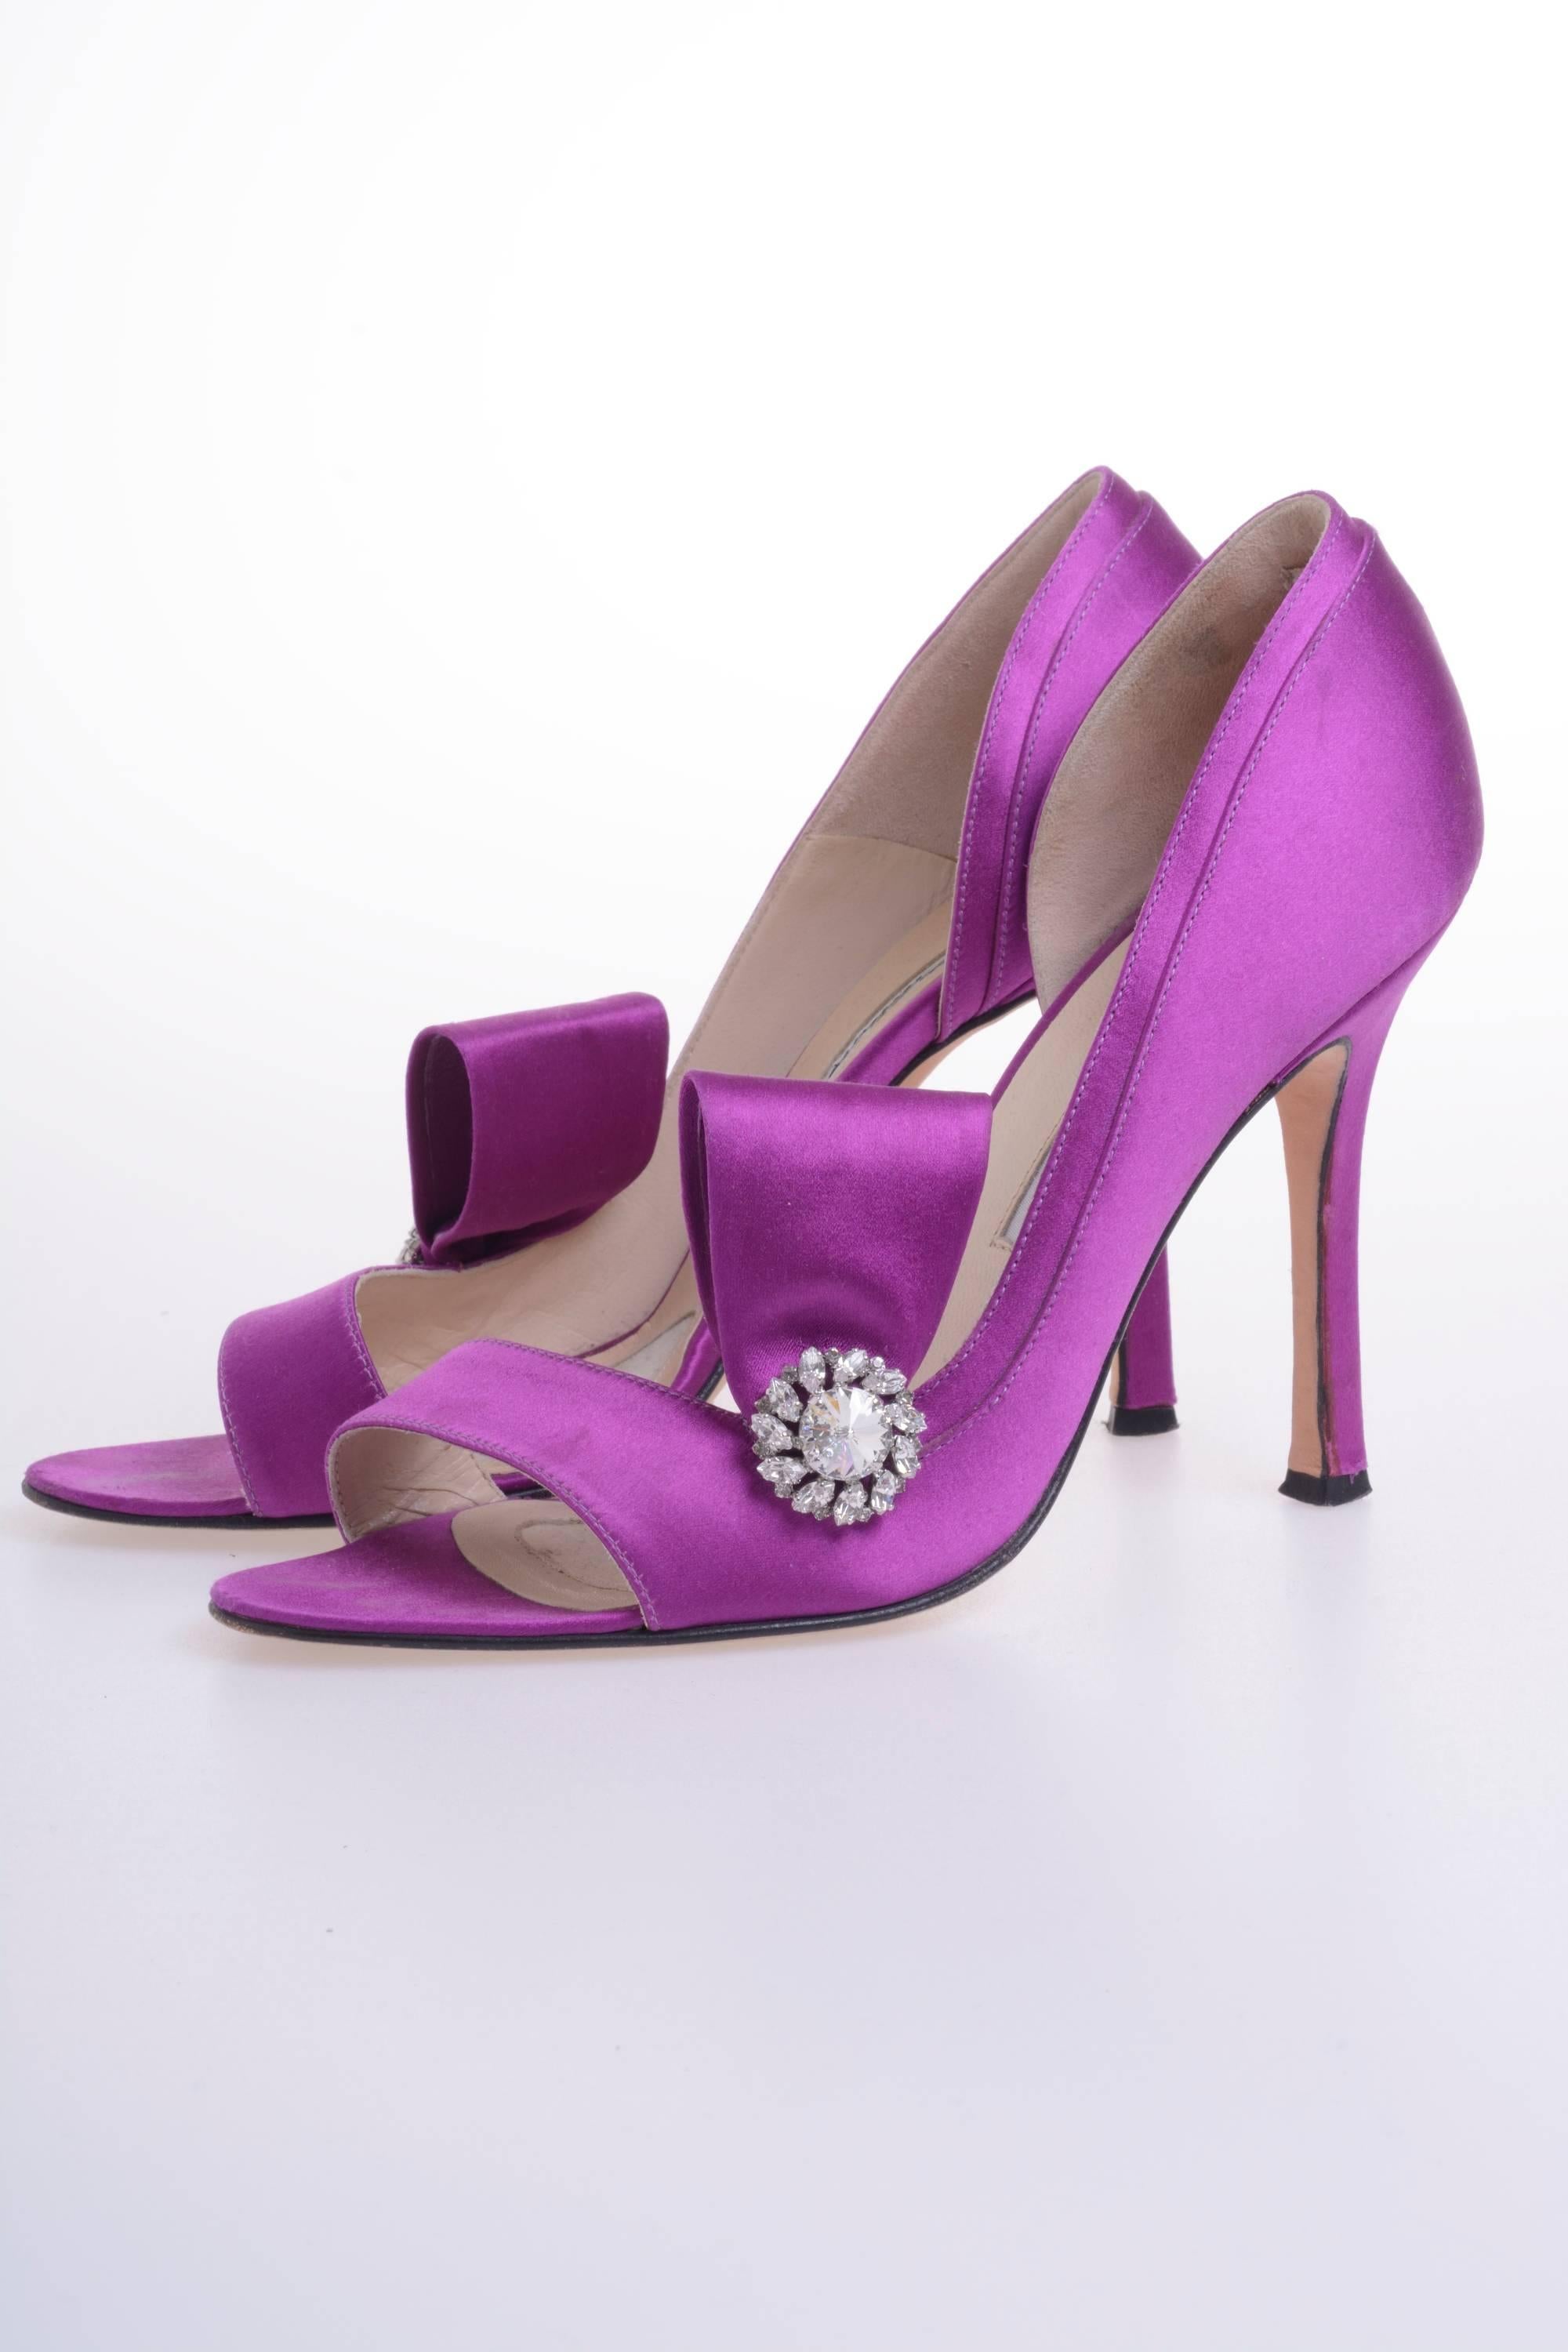 BRIAN ATWOOD d'Orsay pump shoes in purple satin, almond toe, stiletto heel, leather insole, with a frontal bow and decorated with a floral detail in a round brilliant and marquise crystals. Made in Italy.

Excellent condition 

Label on outsole: